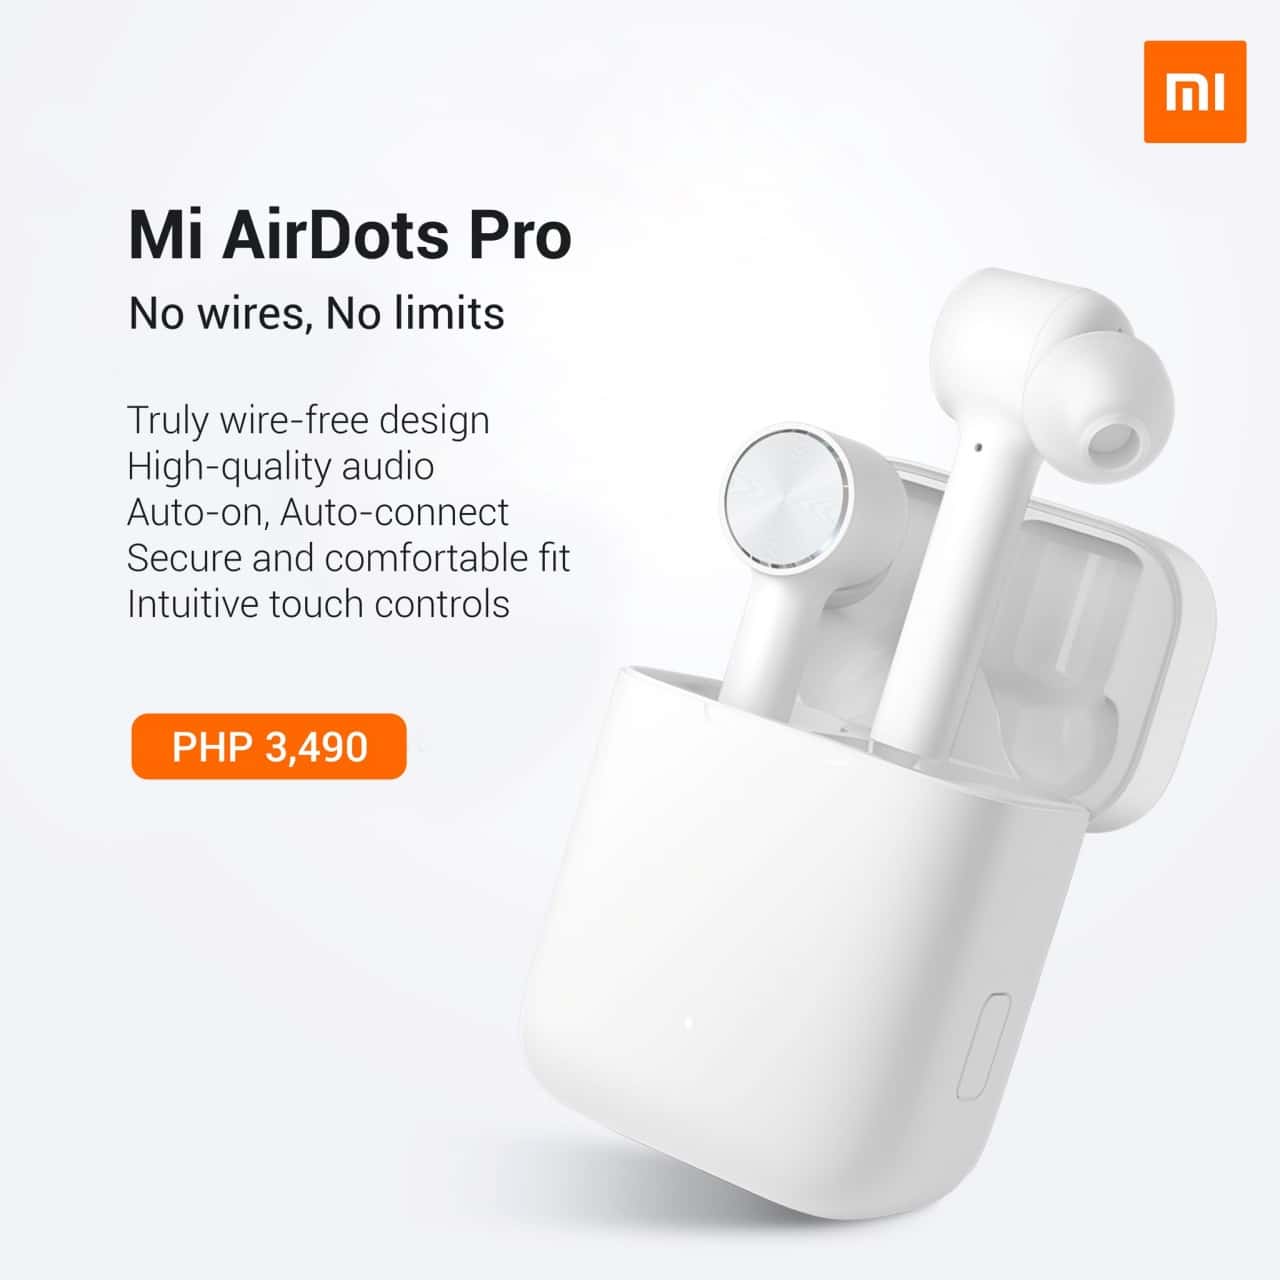 Xiaomi Mi AirDots Pro: Price and availability in the Philippines